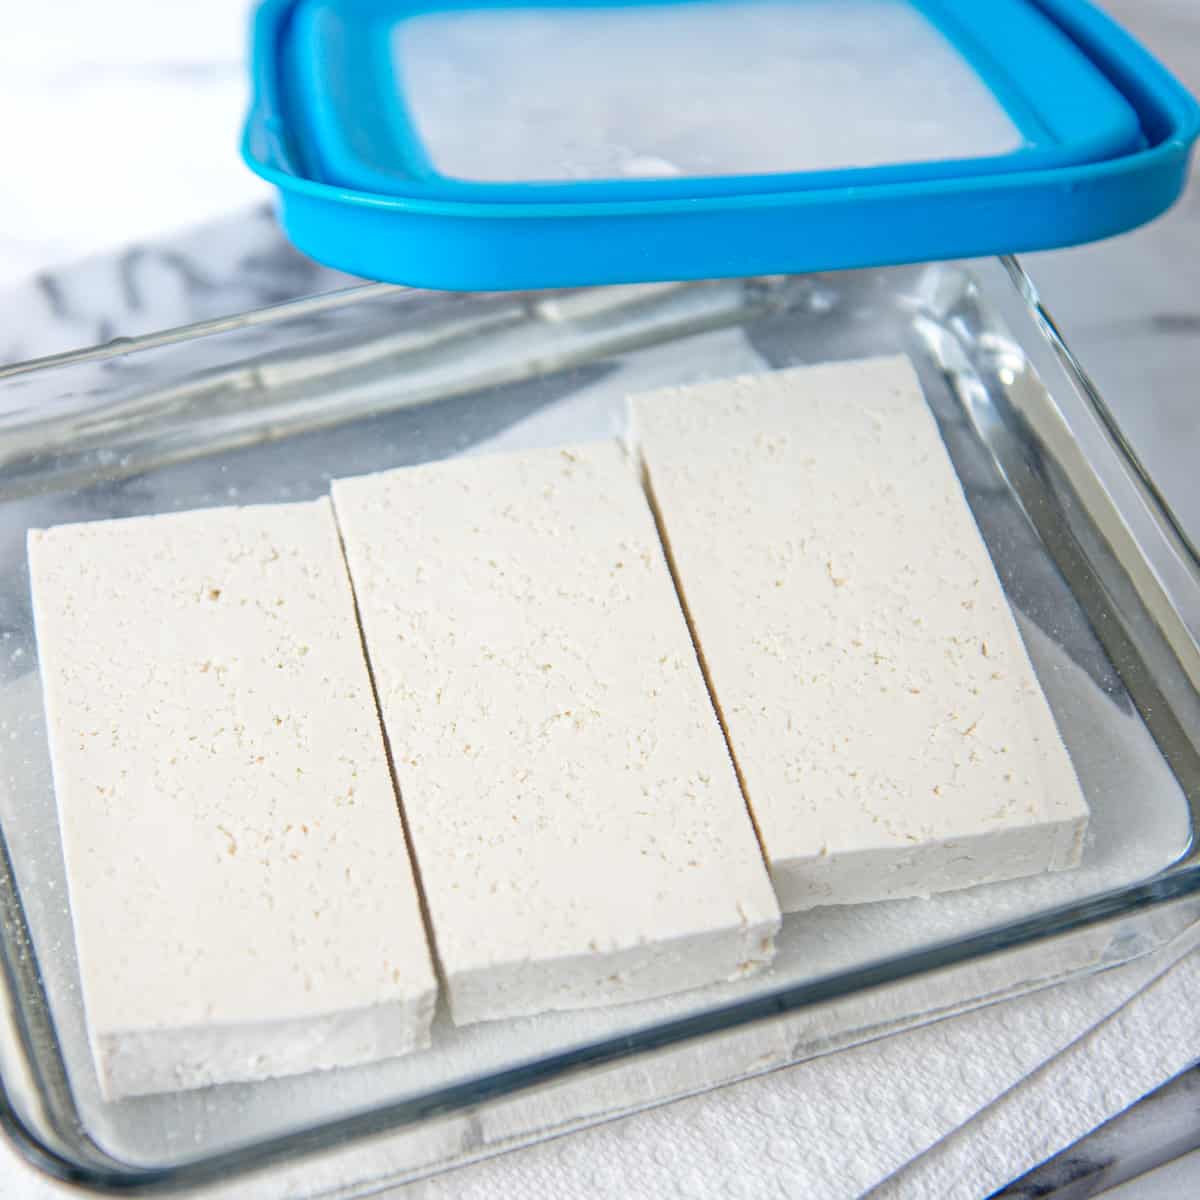 Leftover tofu uncooked in a glass container.